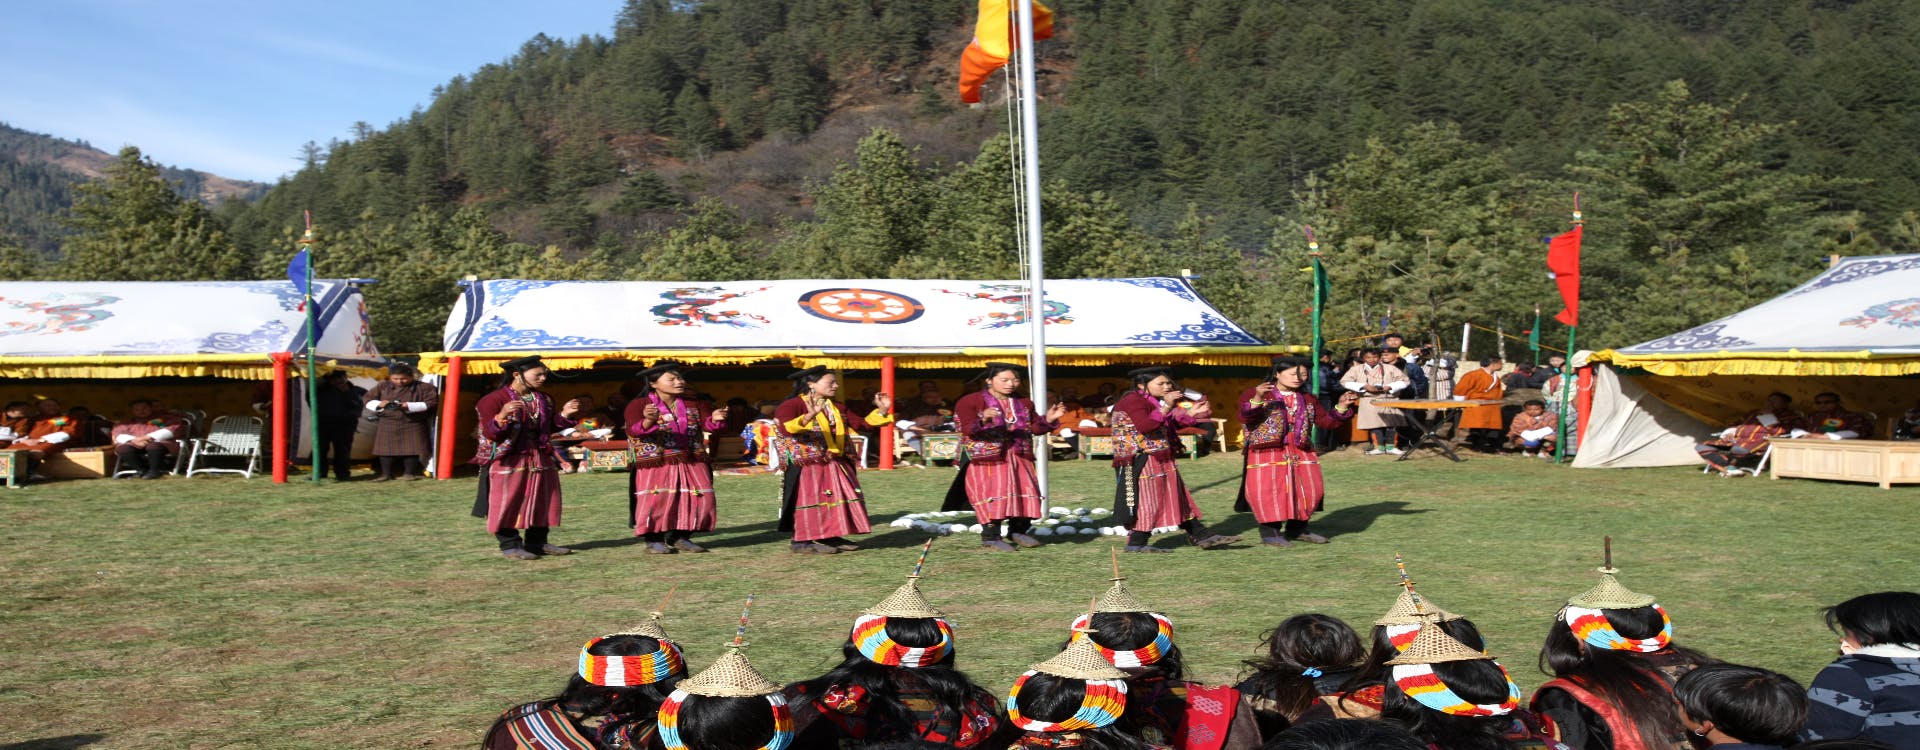 Why Bhutan is known as mesmerizing Culture and Diversity country?